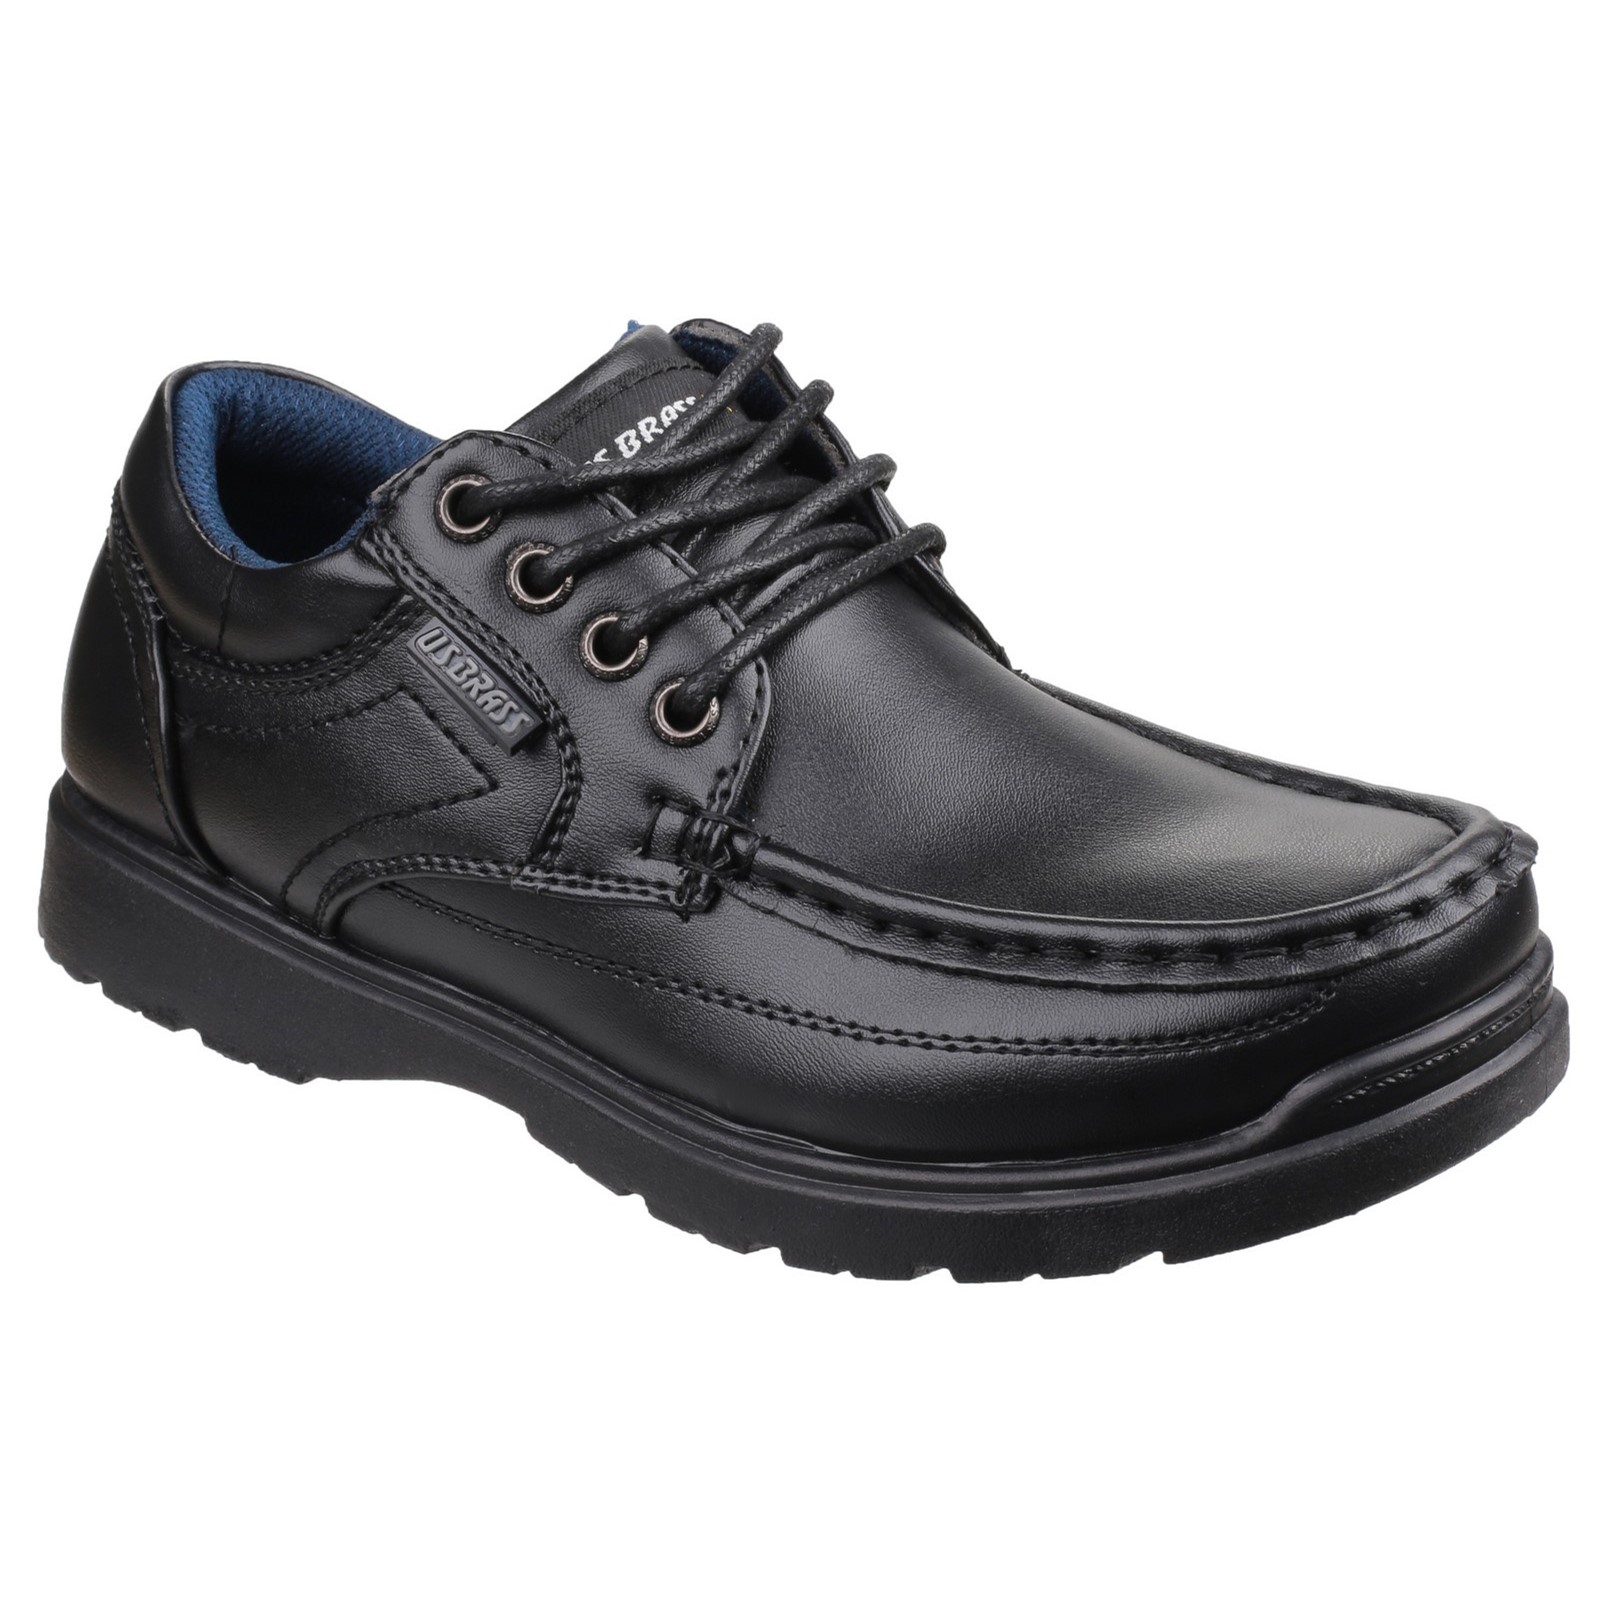 Stubby 2 Boys Back to School Lace Up Shoe